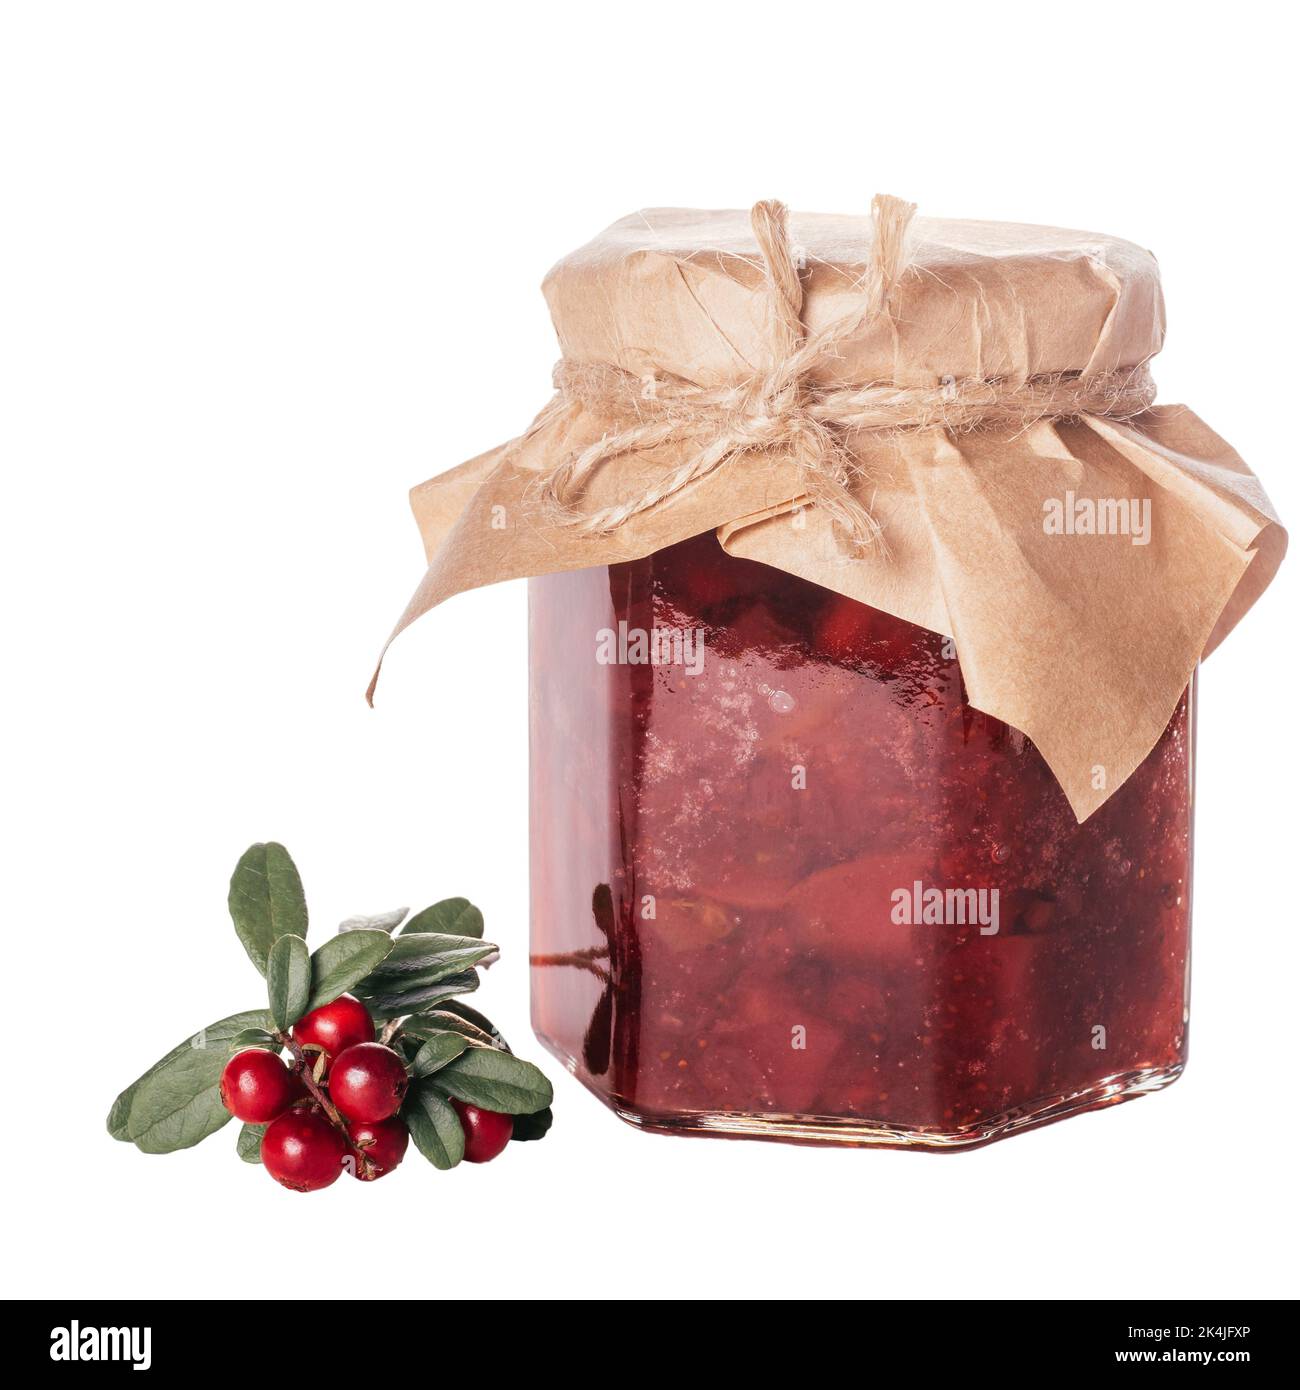 Jar of homemade lingonberry and pear jam with craft paper on lid next to fresh lingonberries isolated on white background. Autumn homemade Stock Photo